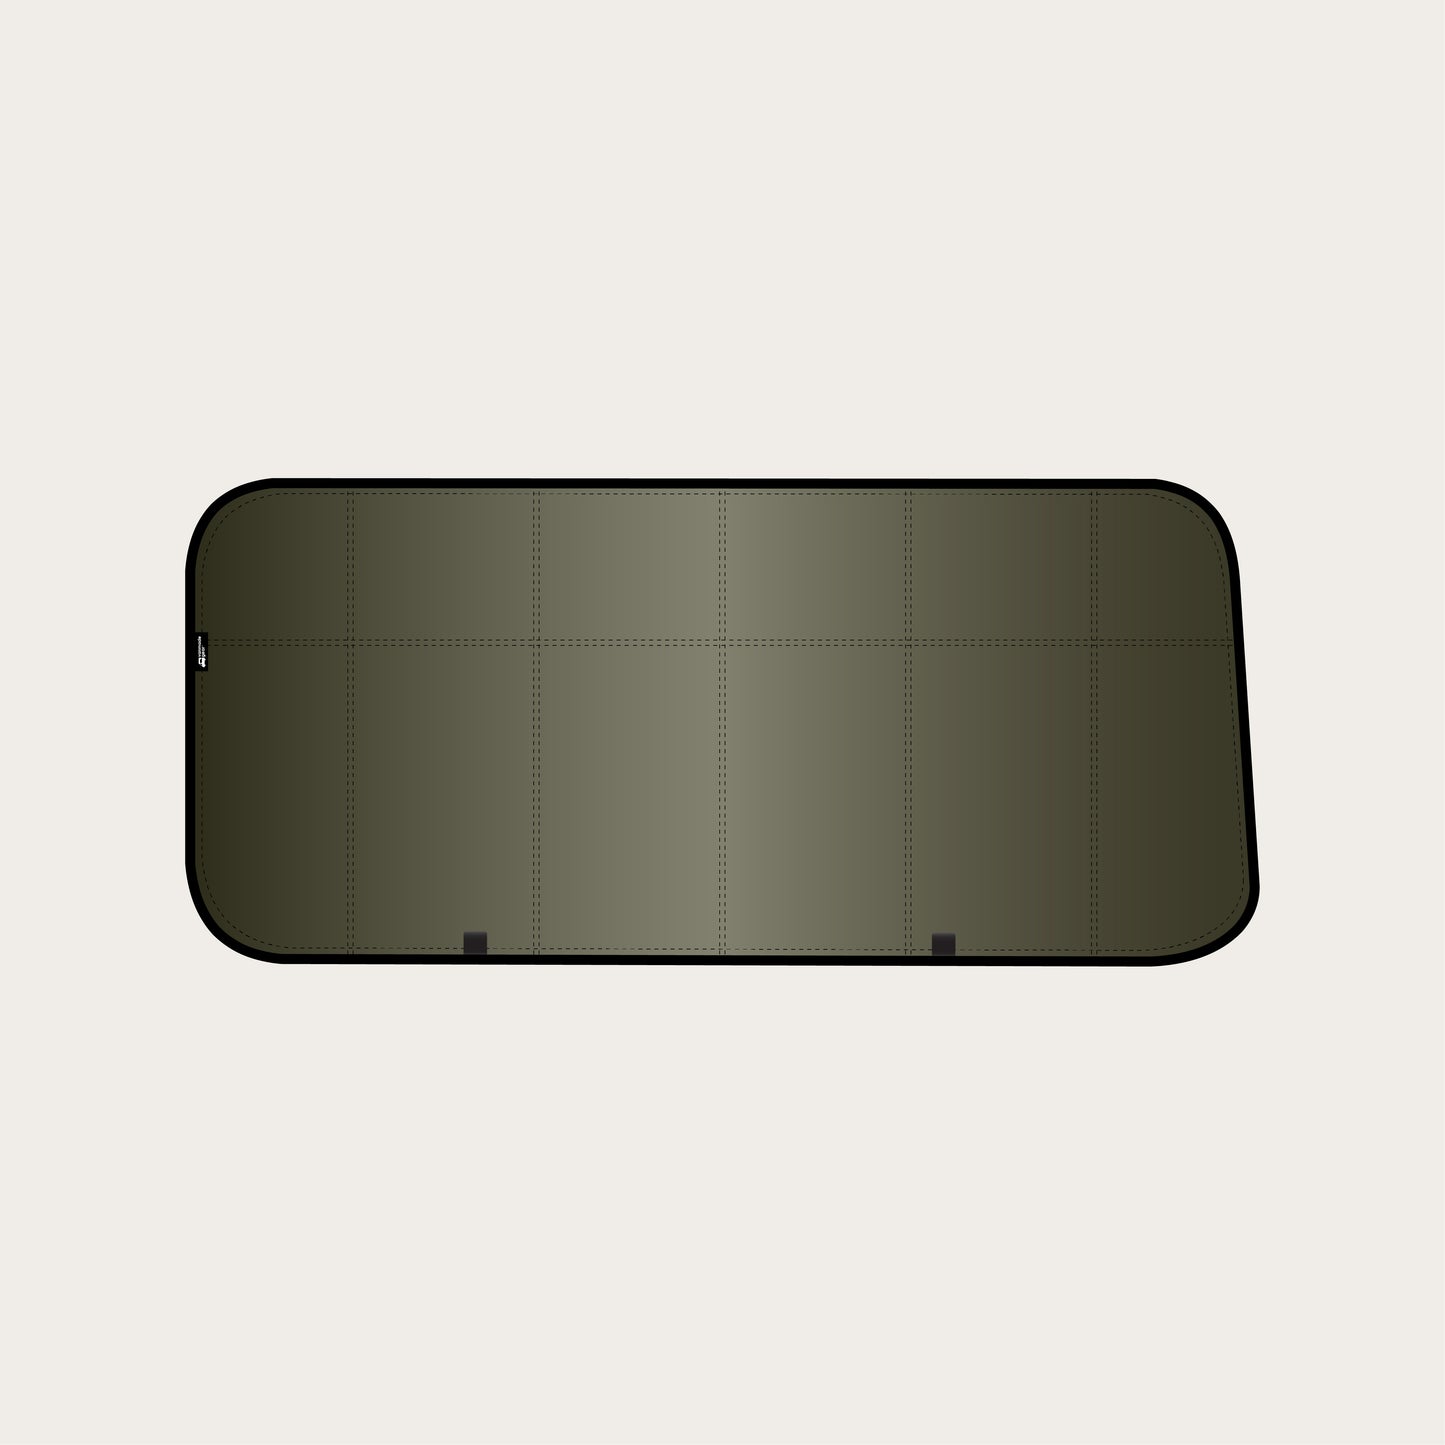 Low Roof Transit - Cargo Window Shade (Driver's Side, 1st Row)